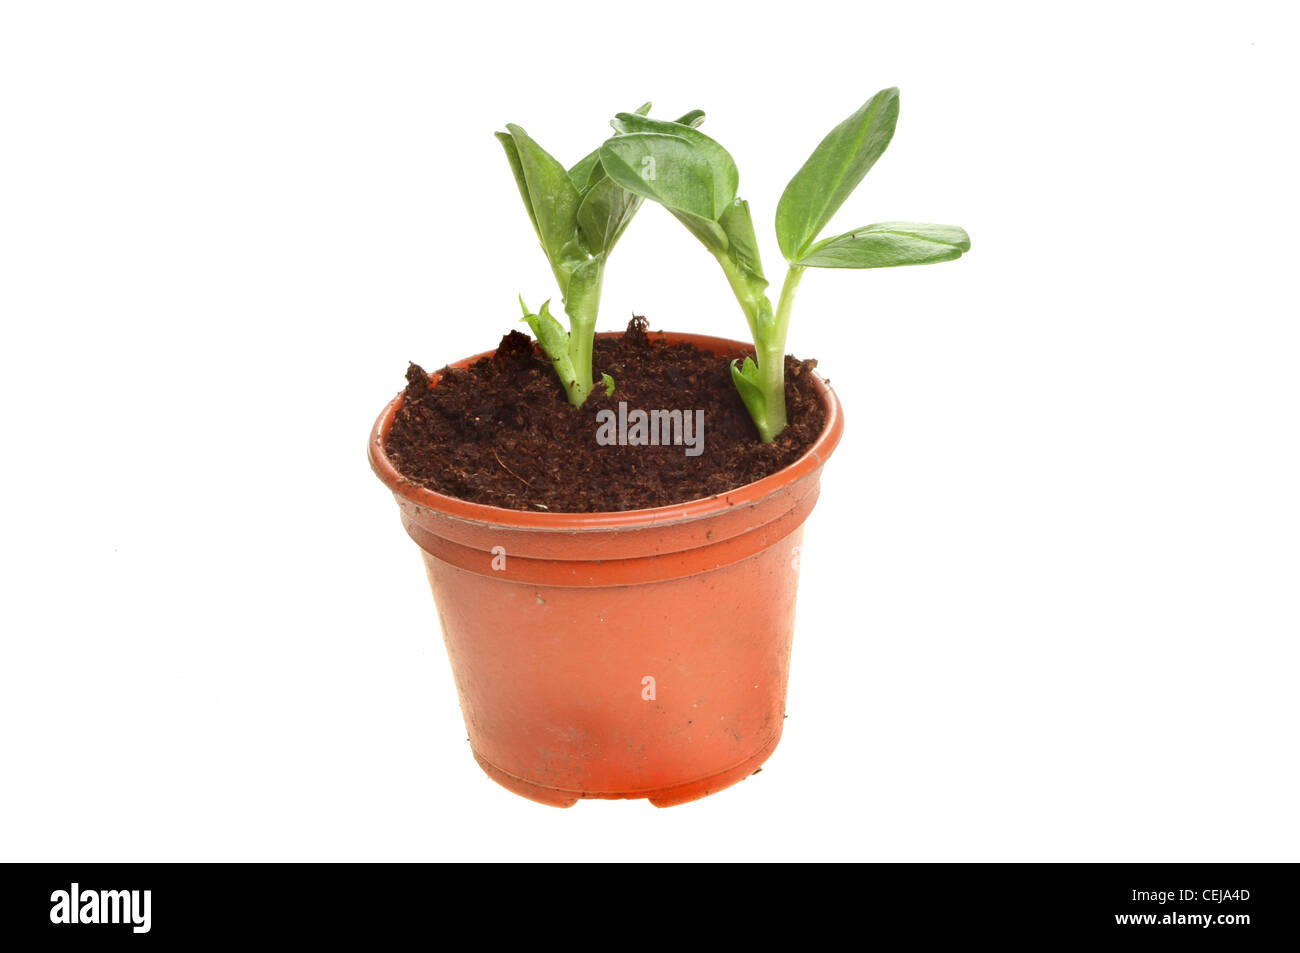 Young broad bean vegetable plant seedlings in a plastic pot isolated against white Stock Photo